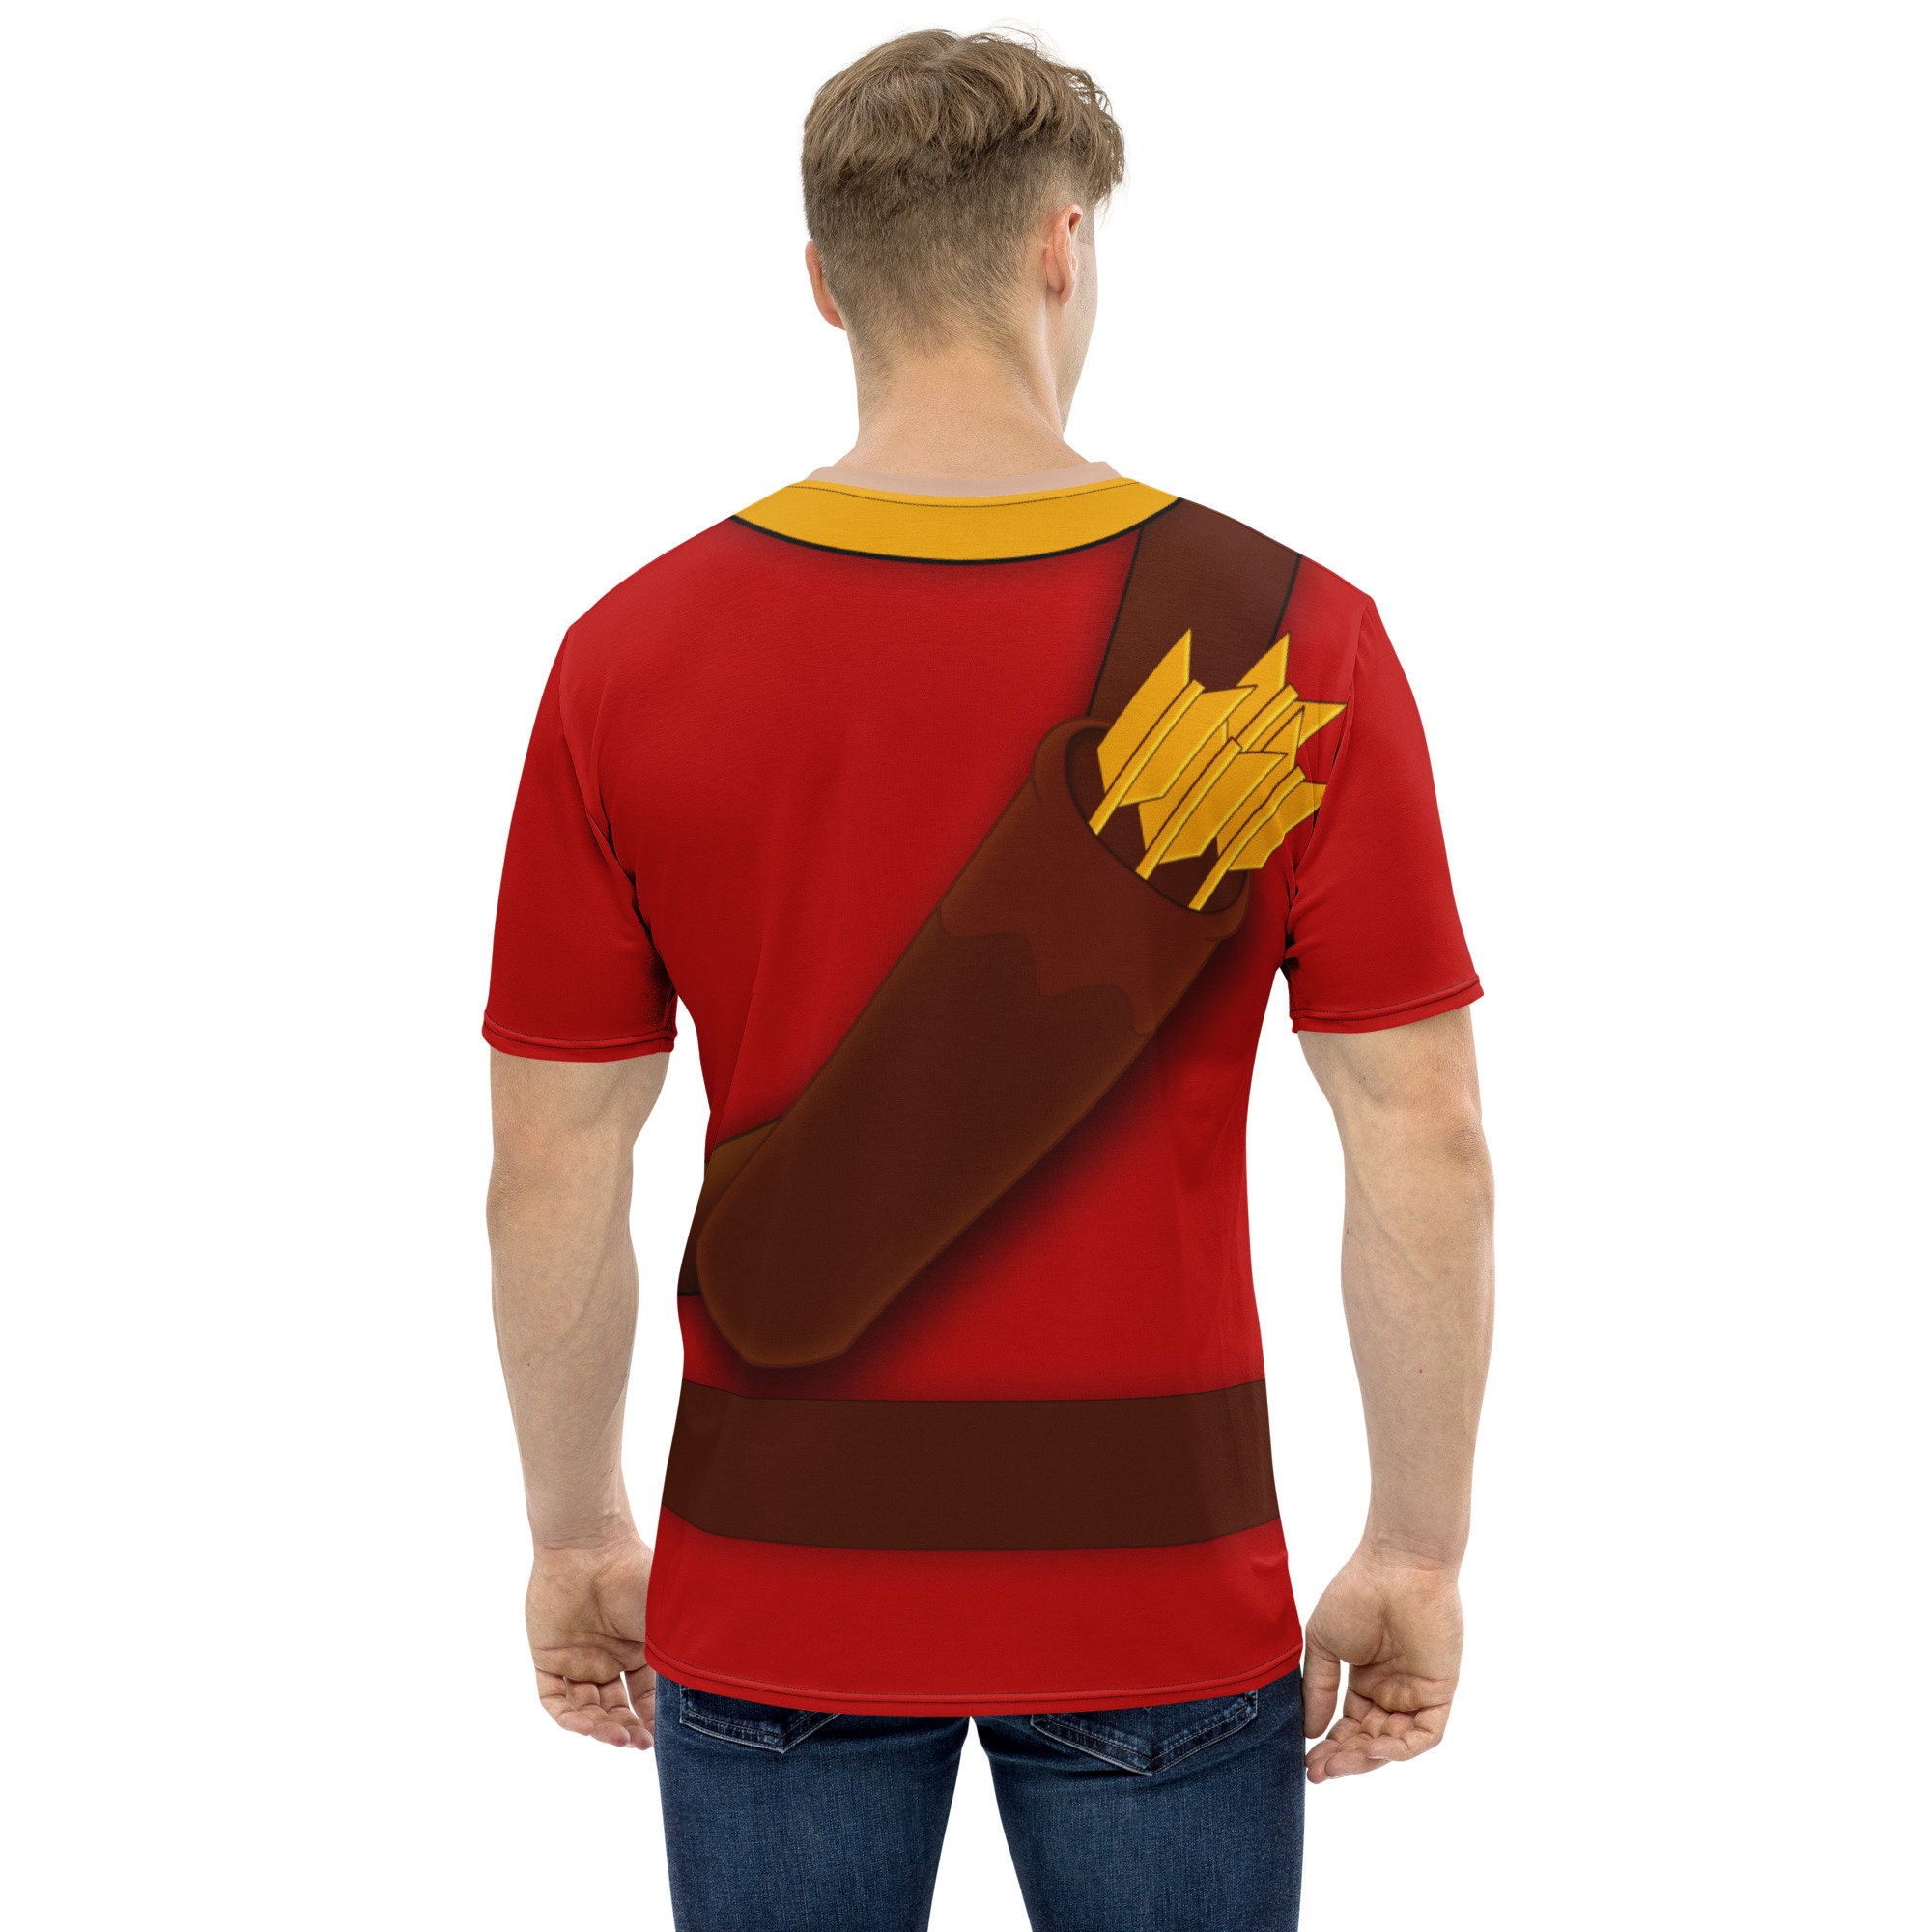 3D Shirt inspired by Gaston from Beauty and the Beast Disney